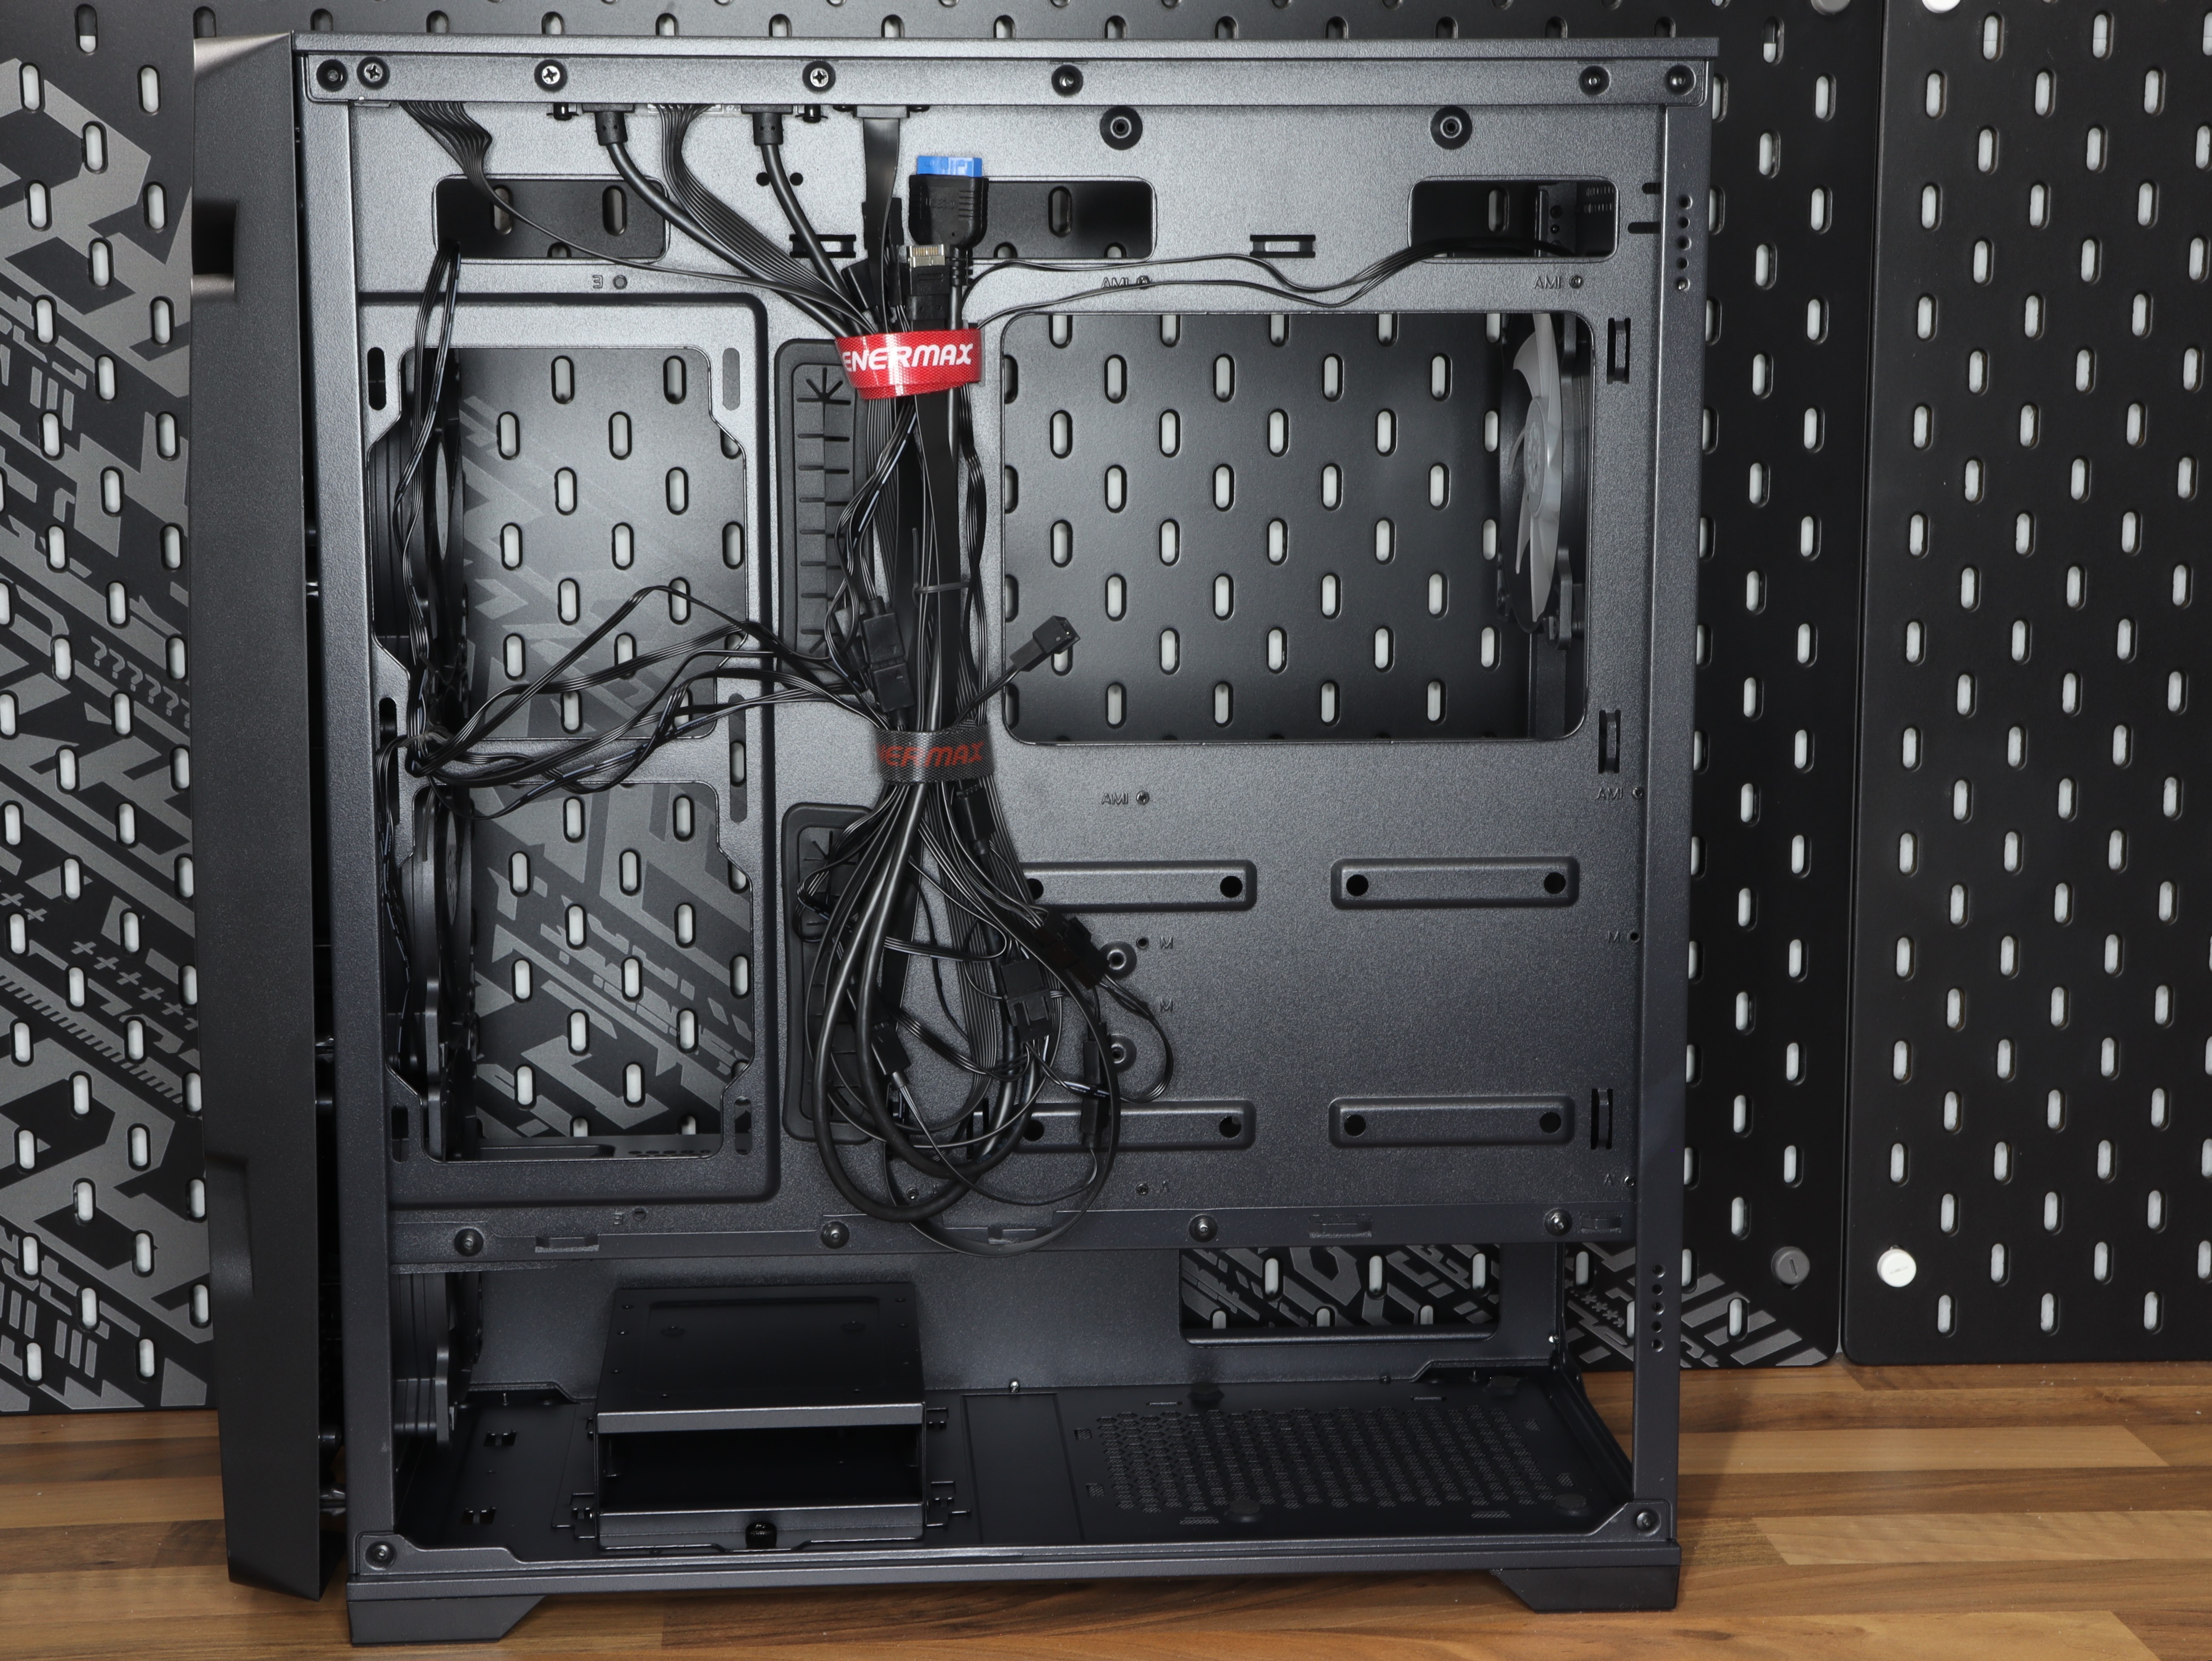 Mid-Tower ATX RGB MS31 Glass Case PC Enermax Tempered MarbleShell 420mm Tempered glass.JPG